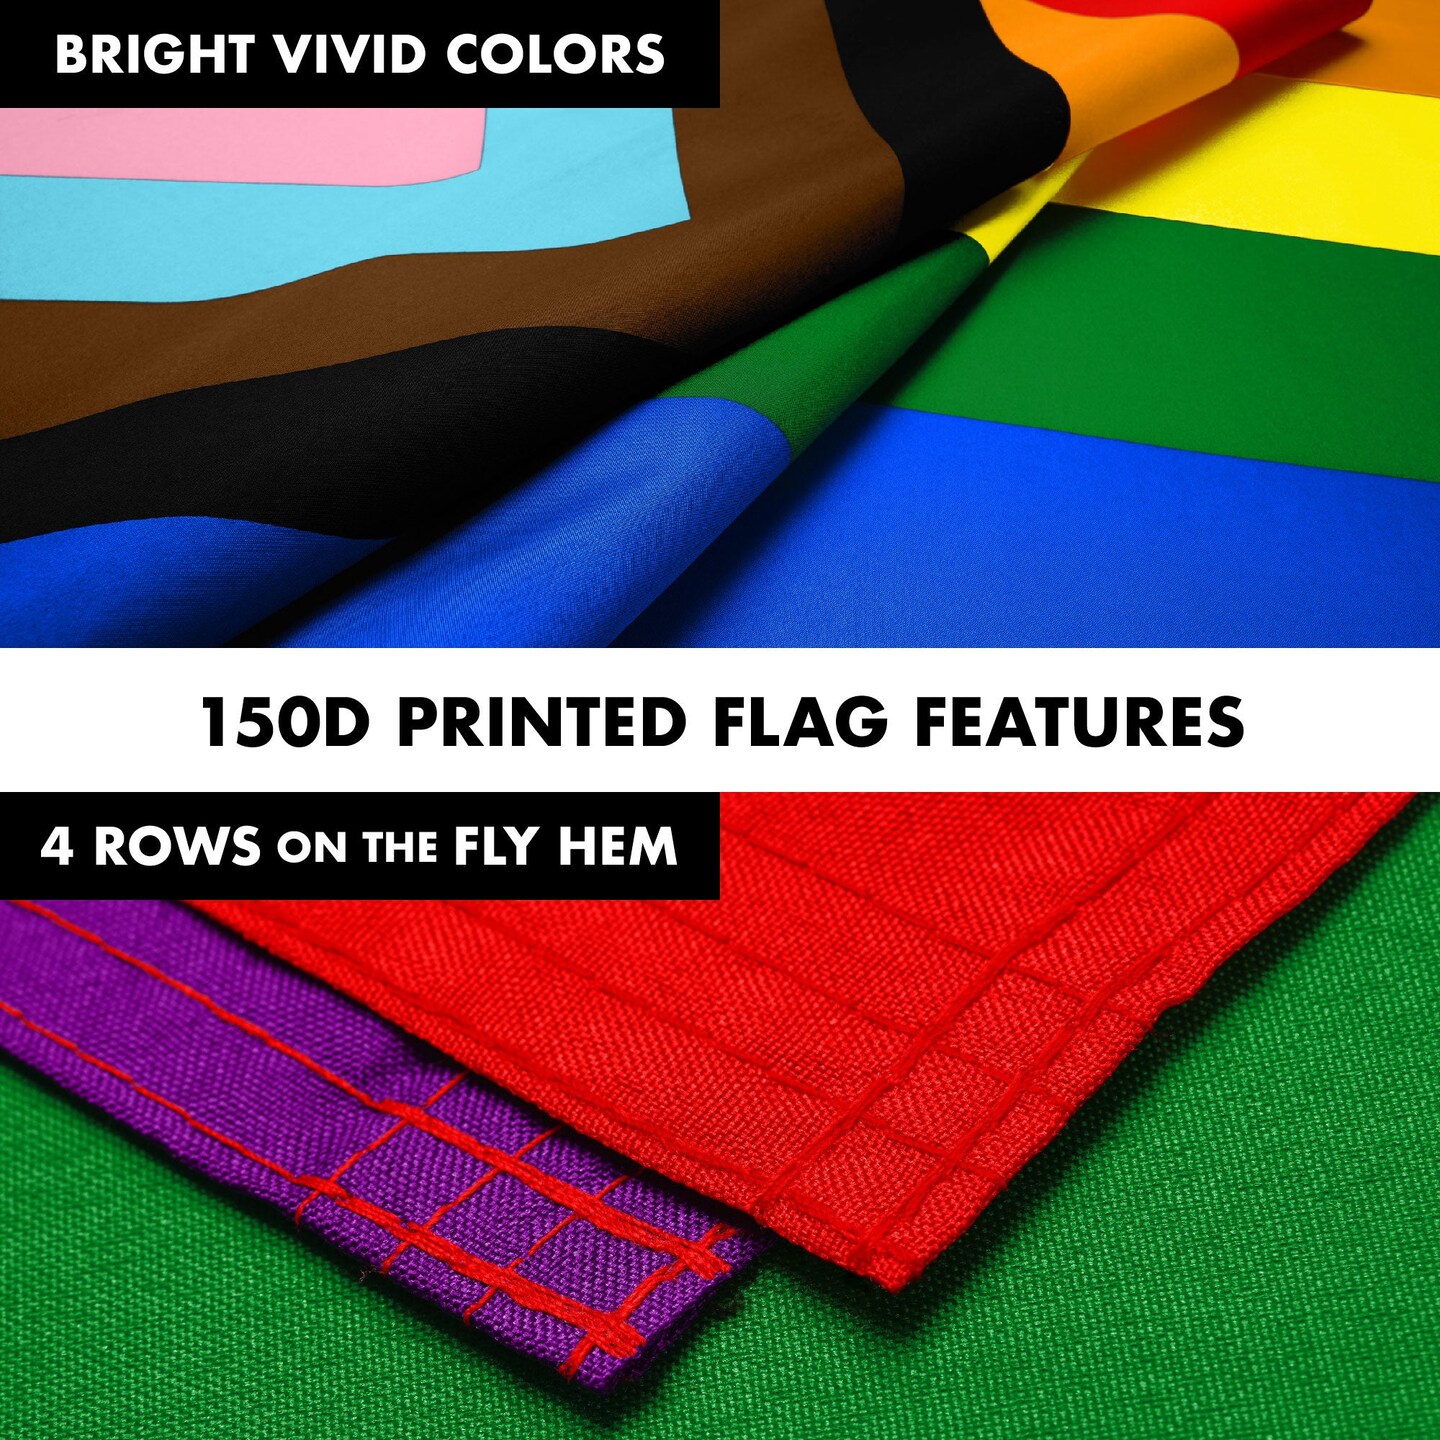 G128 Combo Pack: 6 Ft Tangle Free Aluminum Spinning Flagpole (Silver) &#x26; LGBT Progress Rainbow Pride Flag 3x5 Ft, LiteWeave Pro Series Printed 150D Polyester | Pole with Flag Included